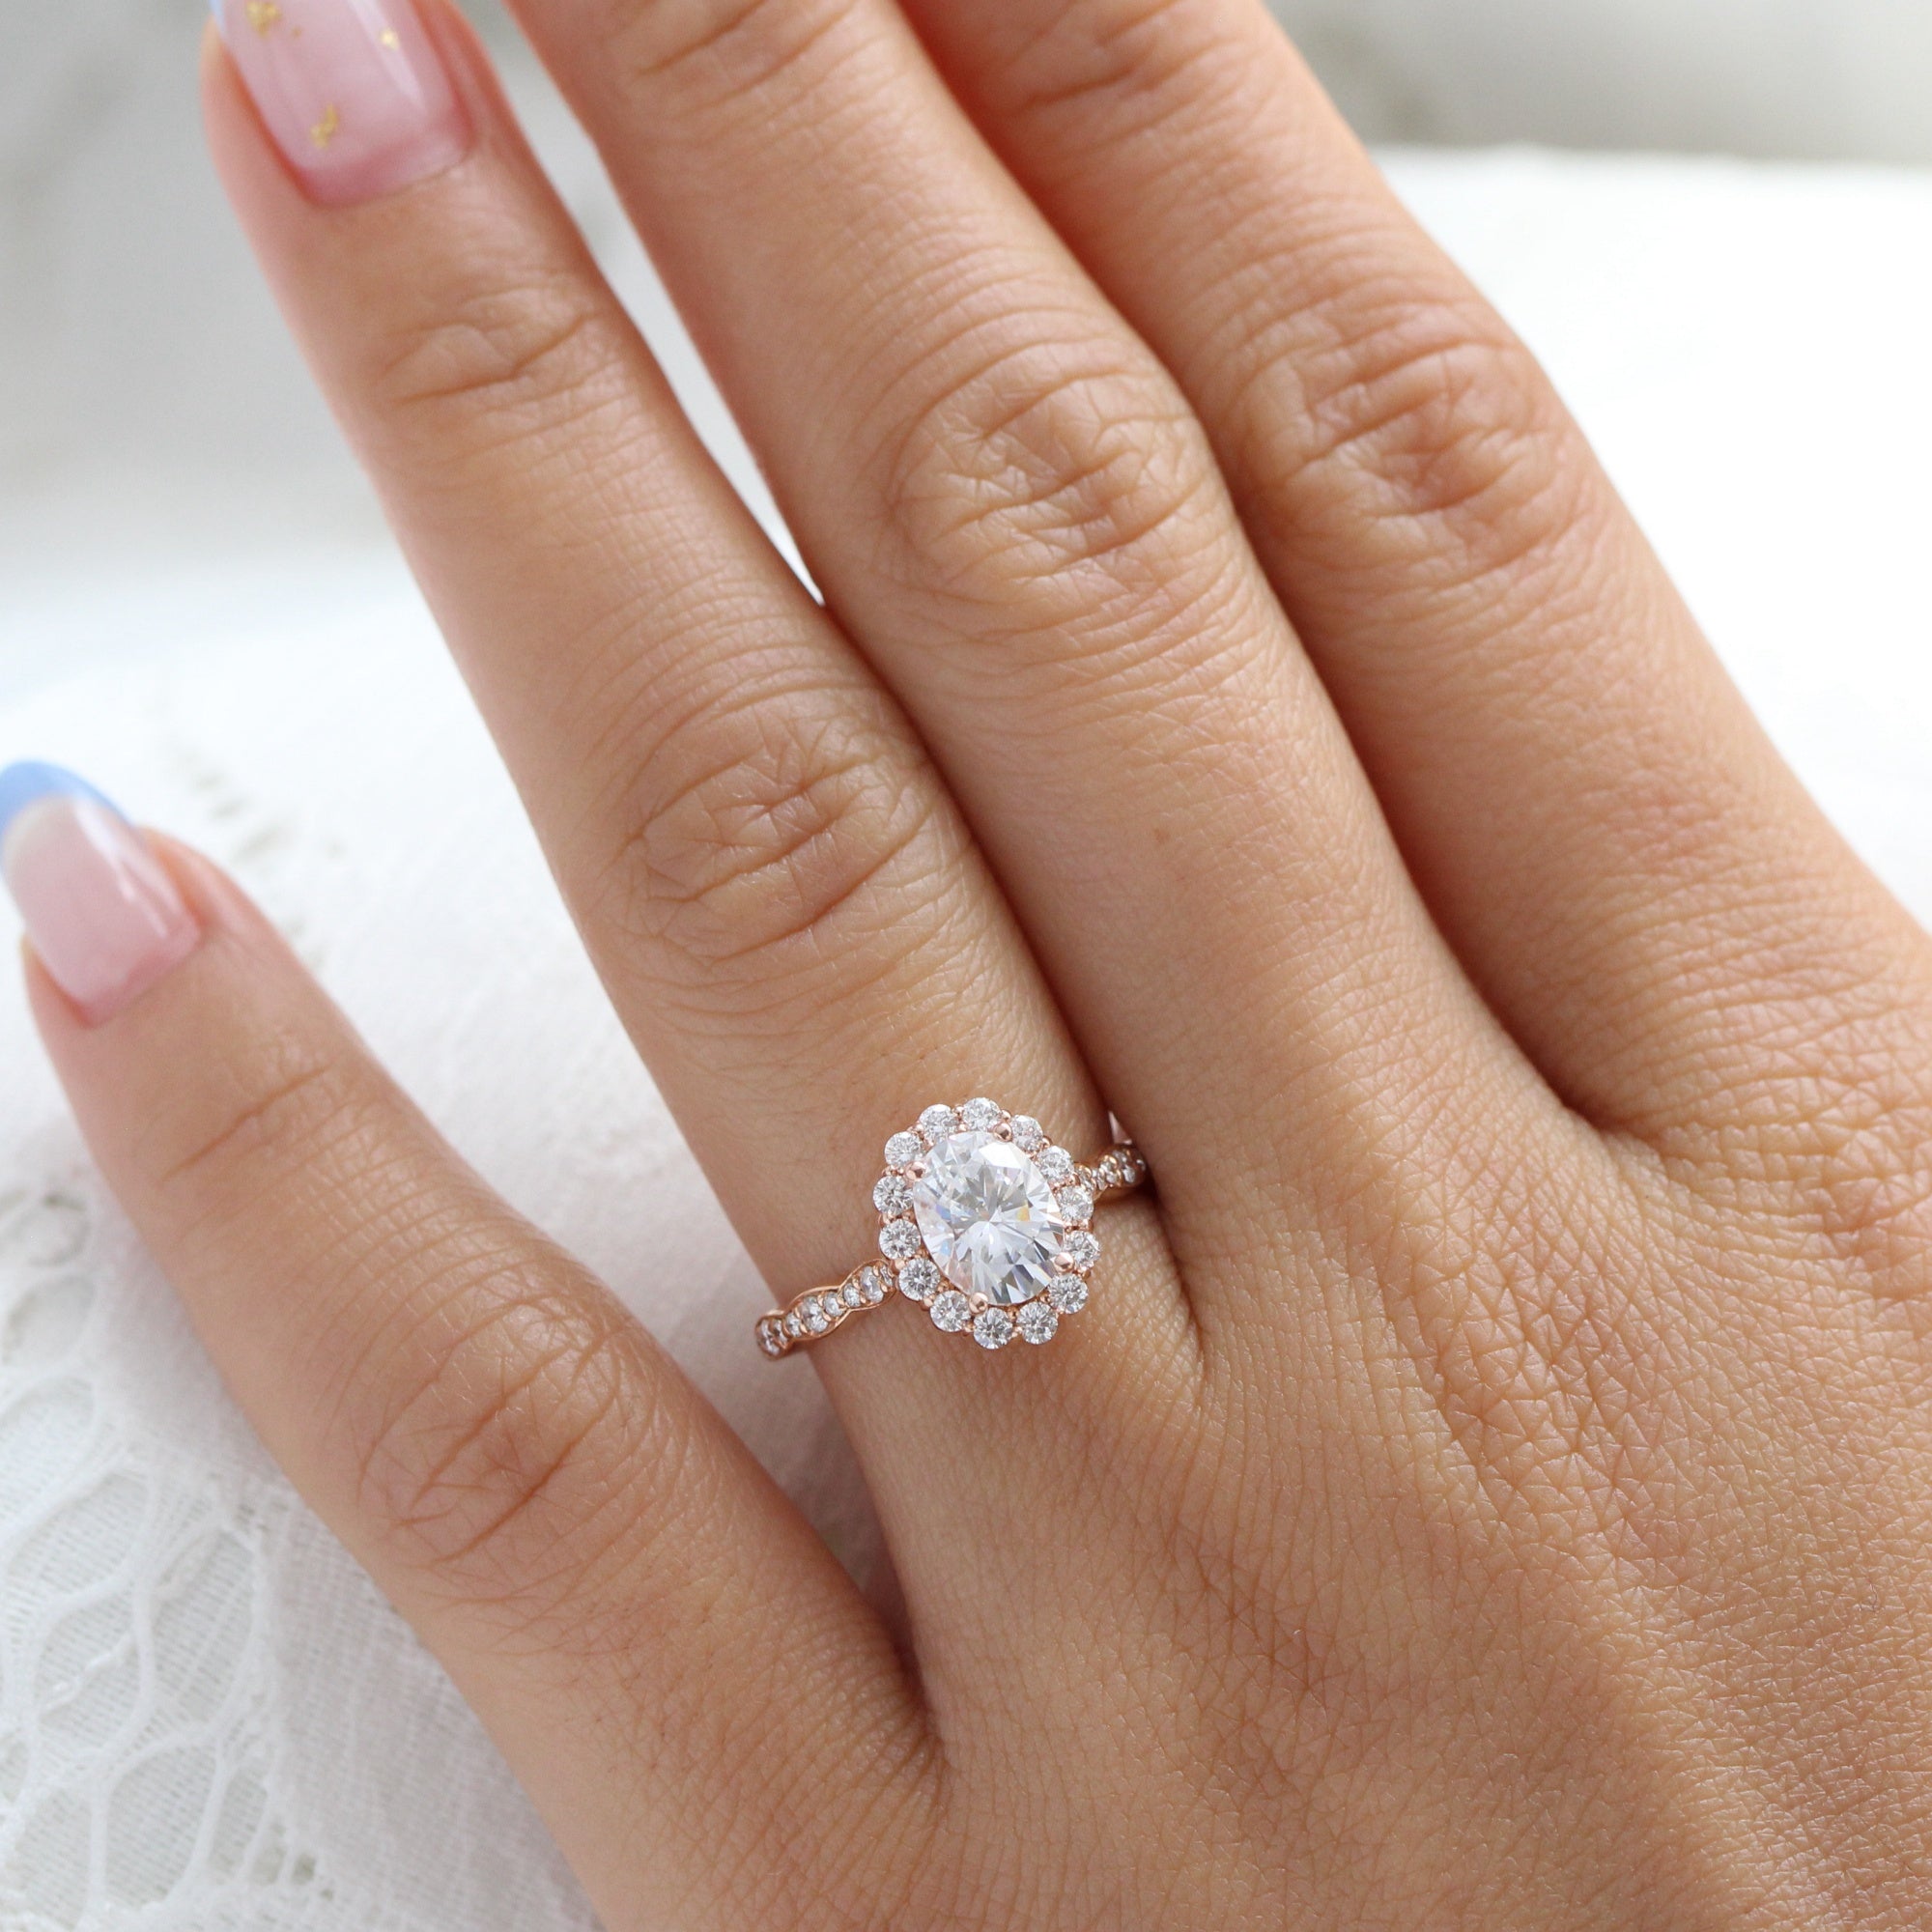 Luna Halo Oval Engagement Ring w/ Moissanite and Diamond in Scalloped Band